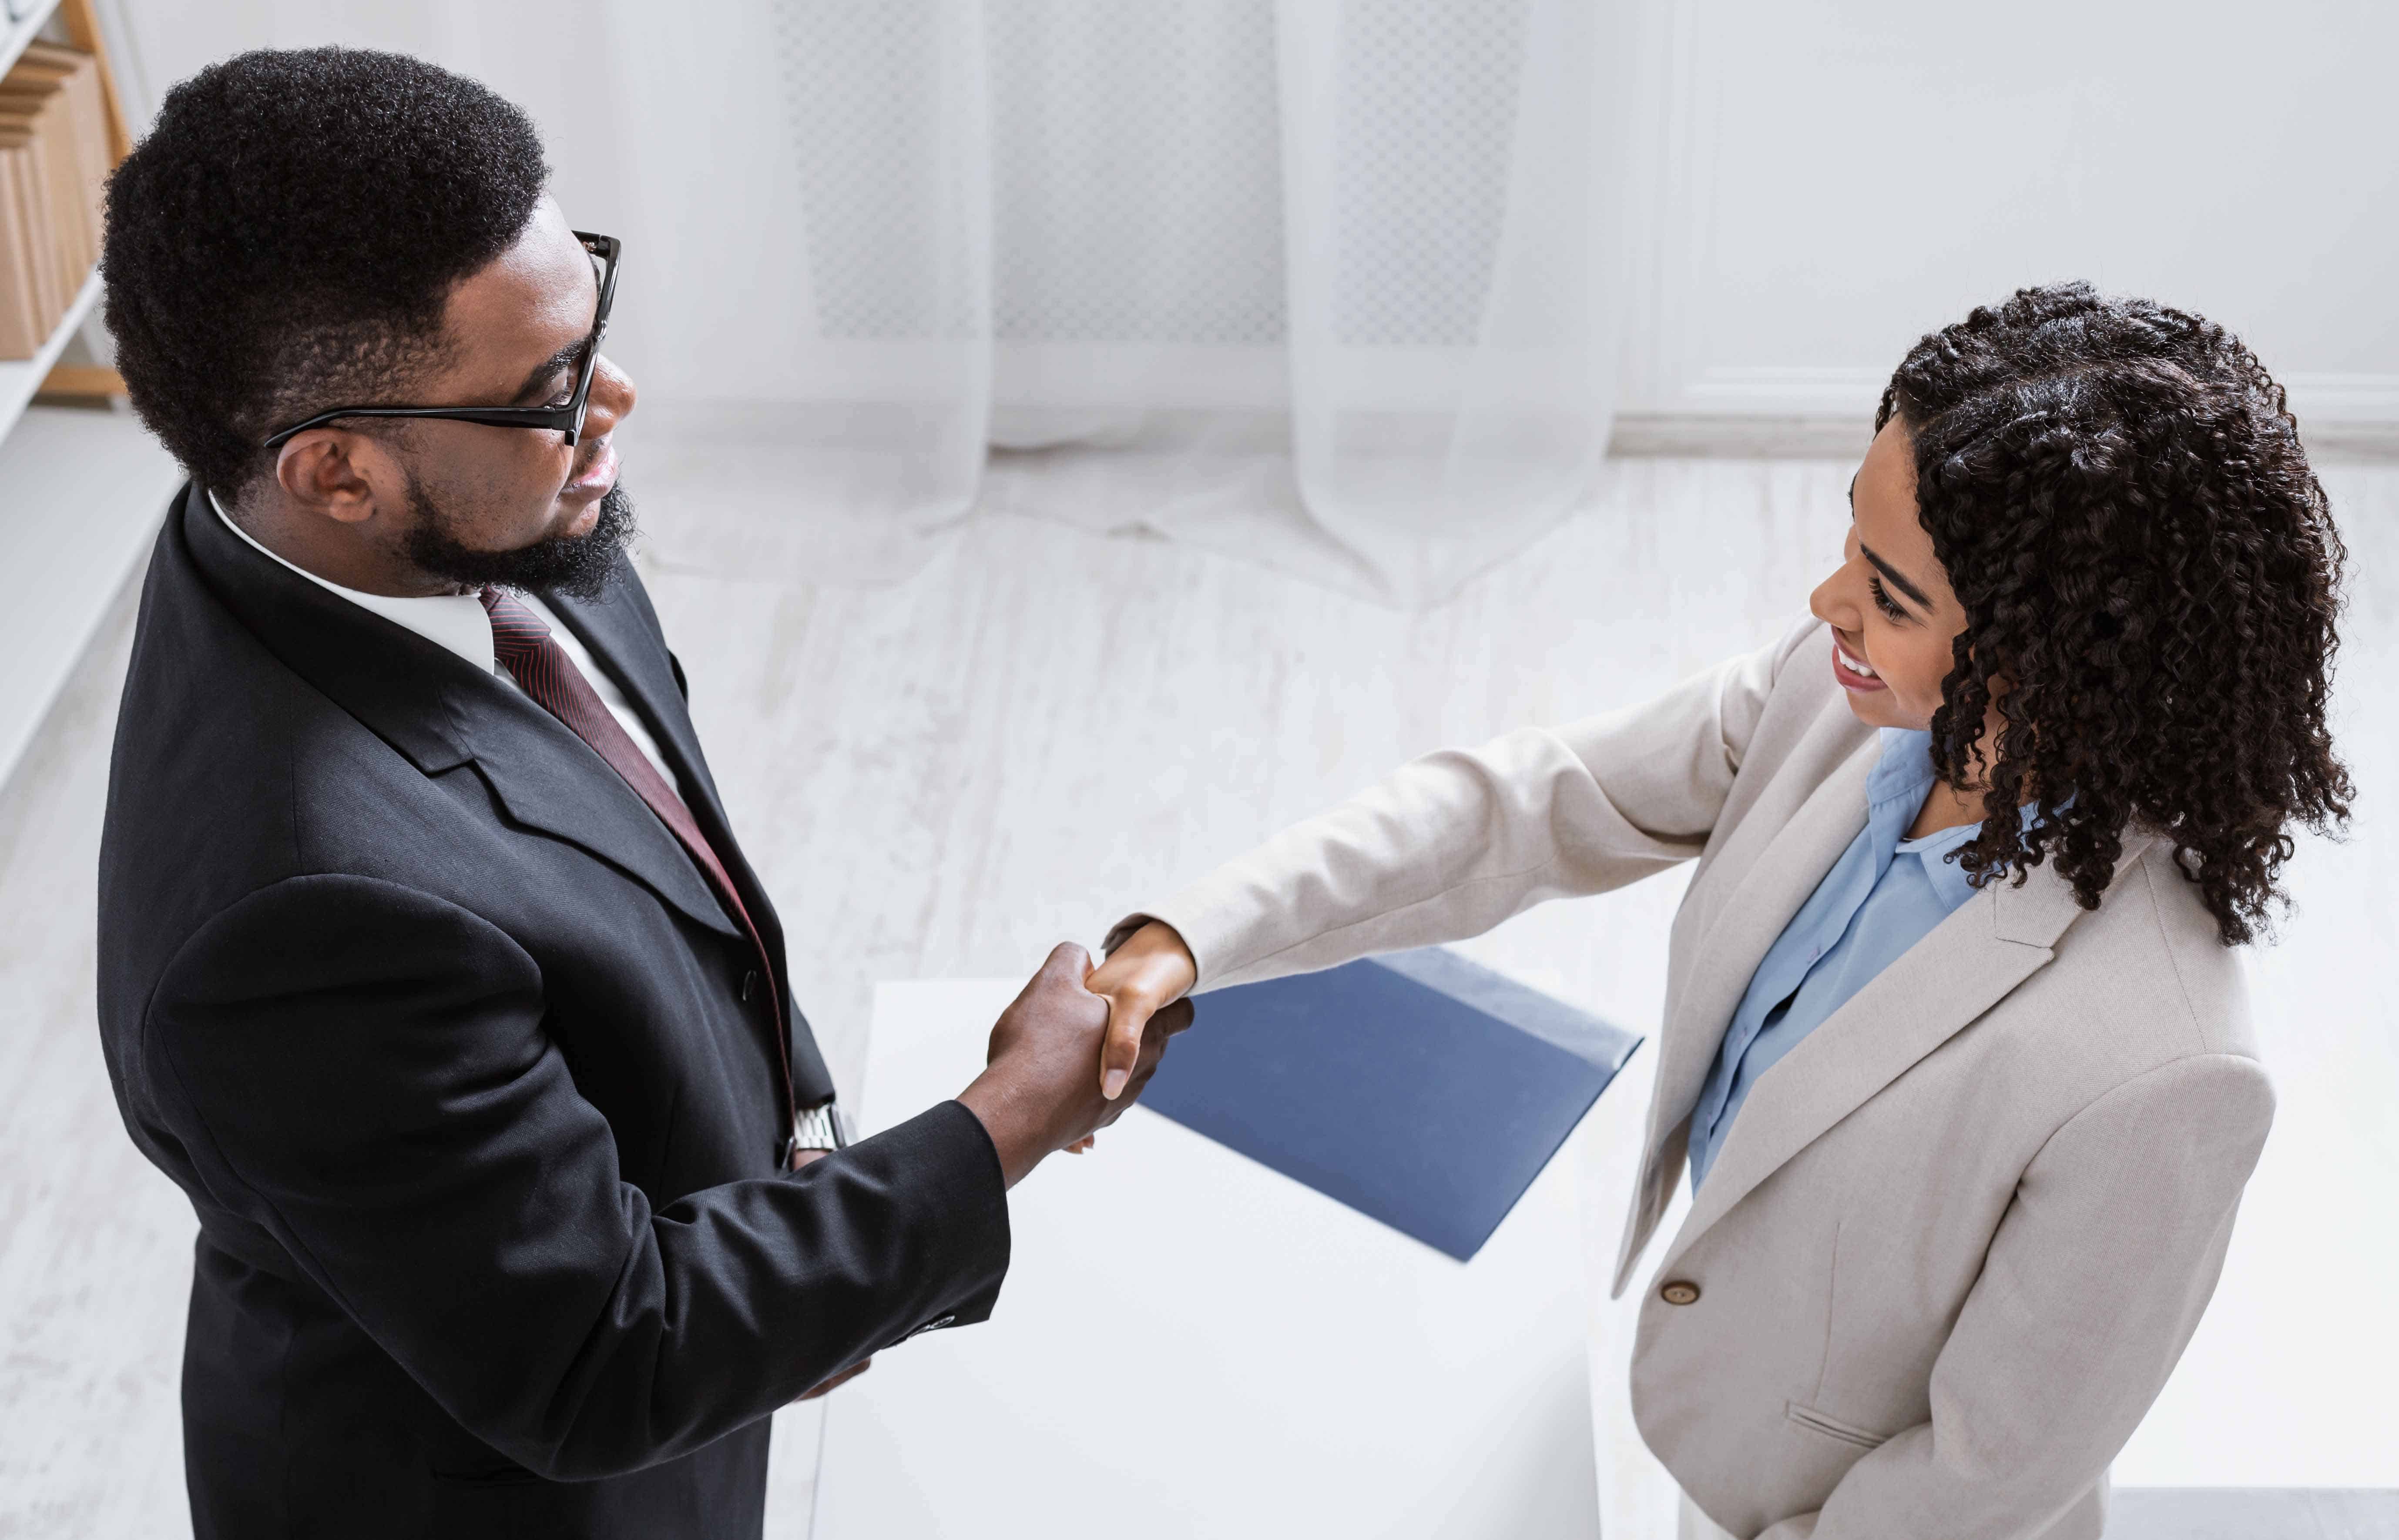 Human resources manager shaking hands with successful vacancy applicant at office, above view. Career fair concept